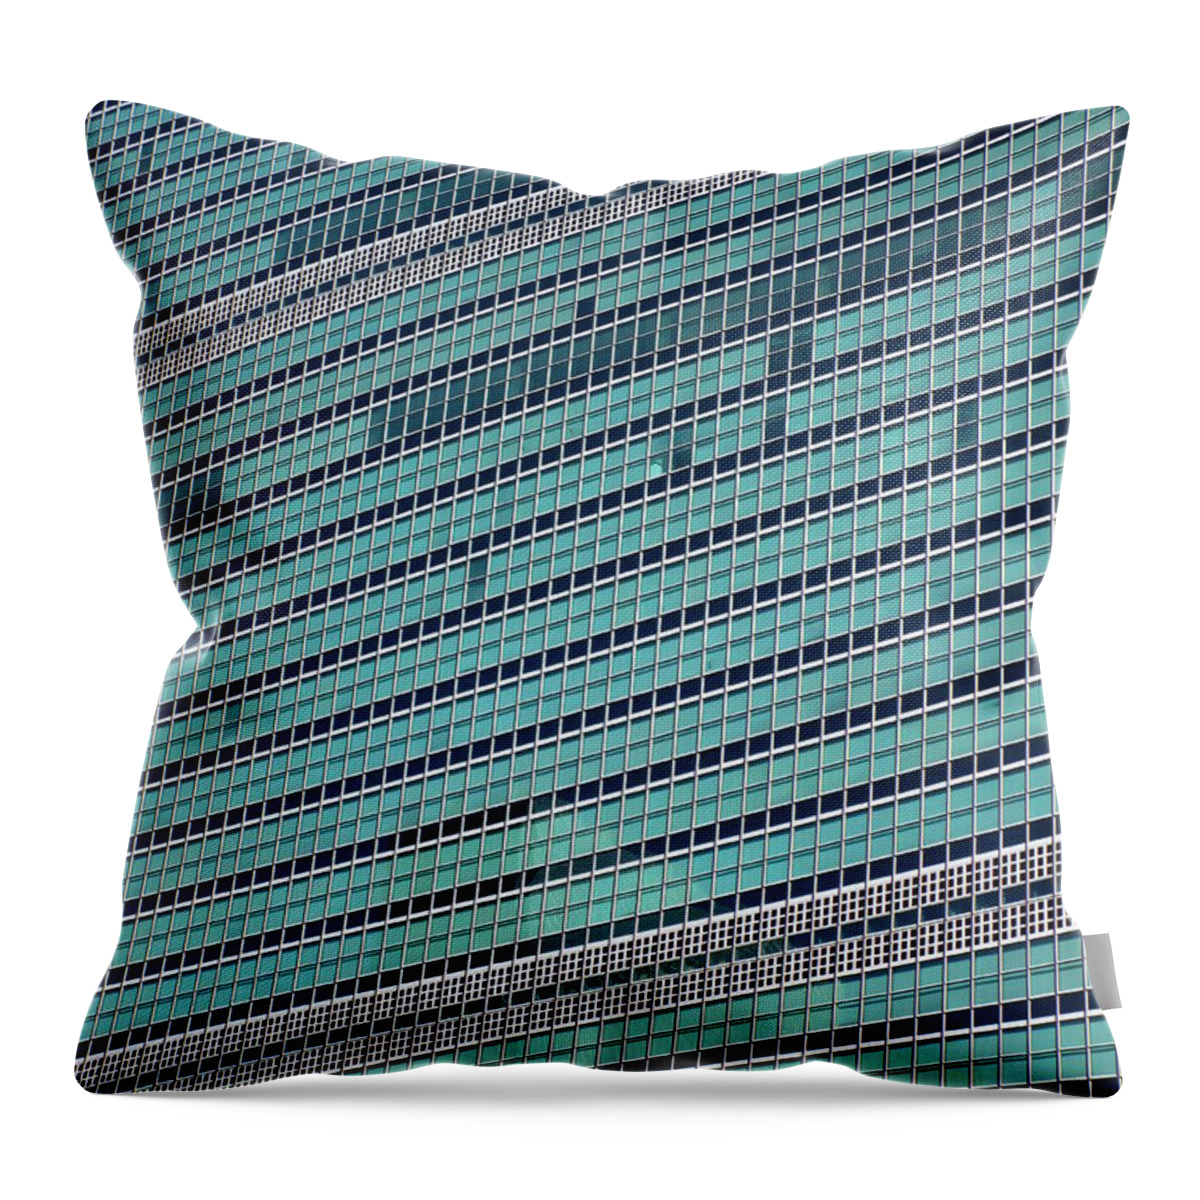 United Nations Throw Pillow featuring the photograph United Nations 2 by Randall Weidner